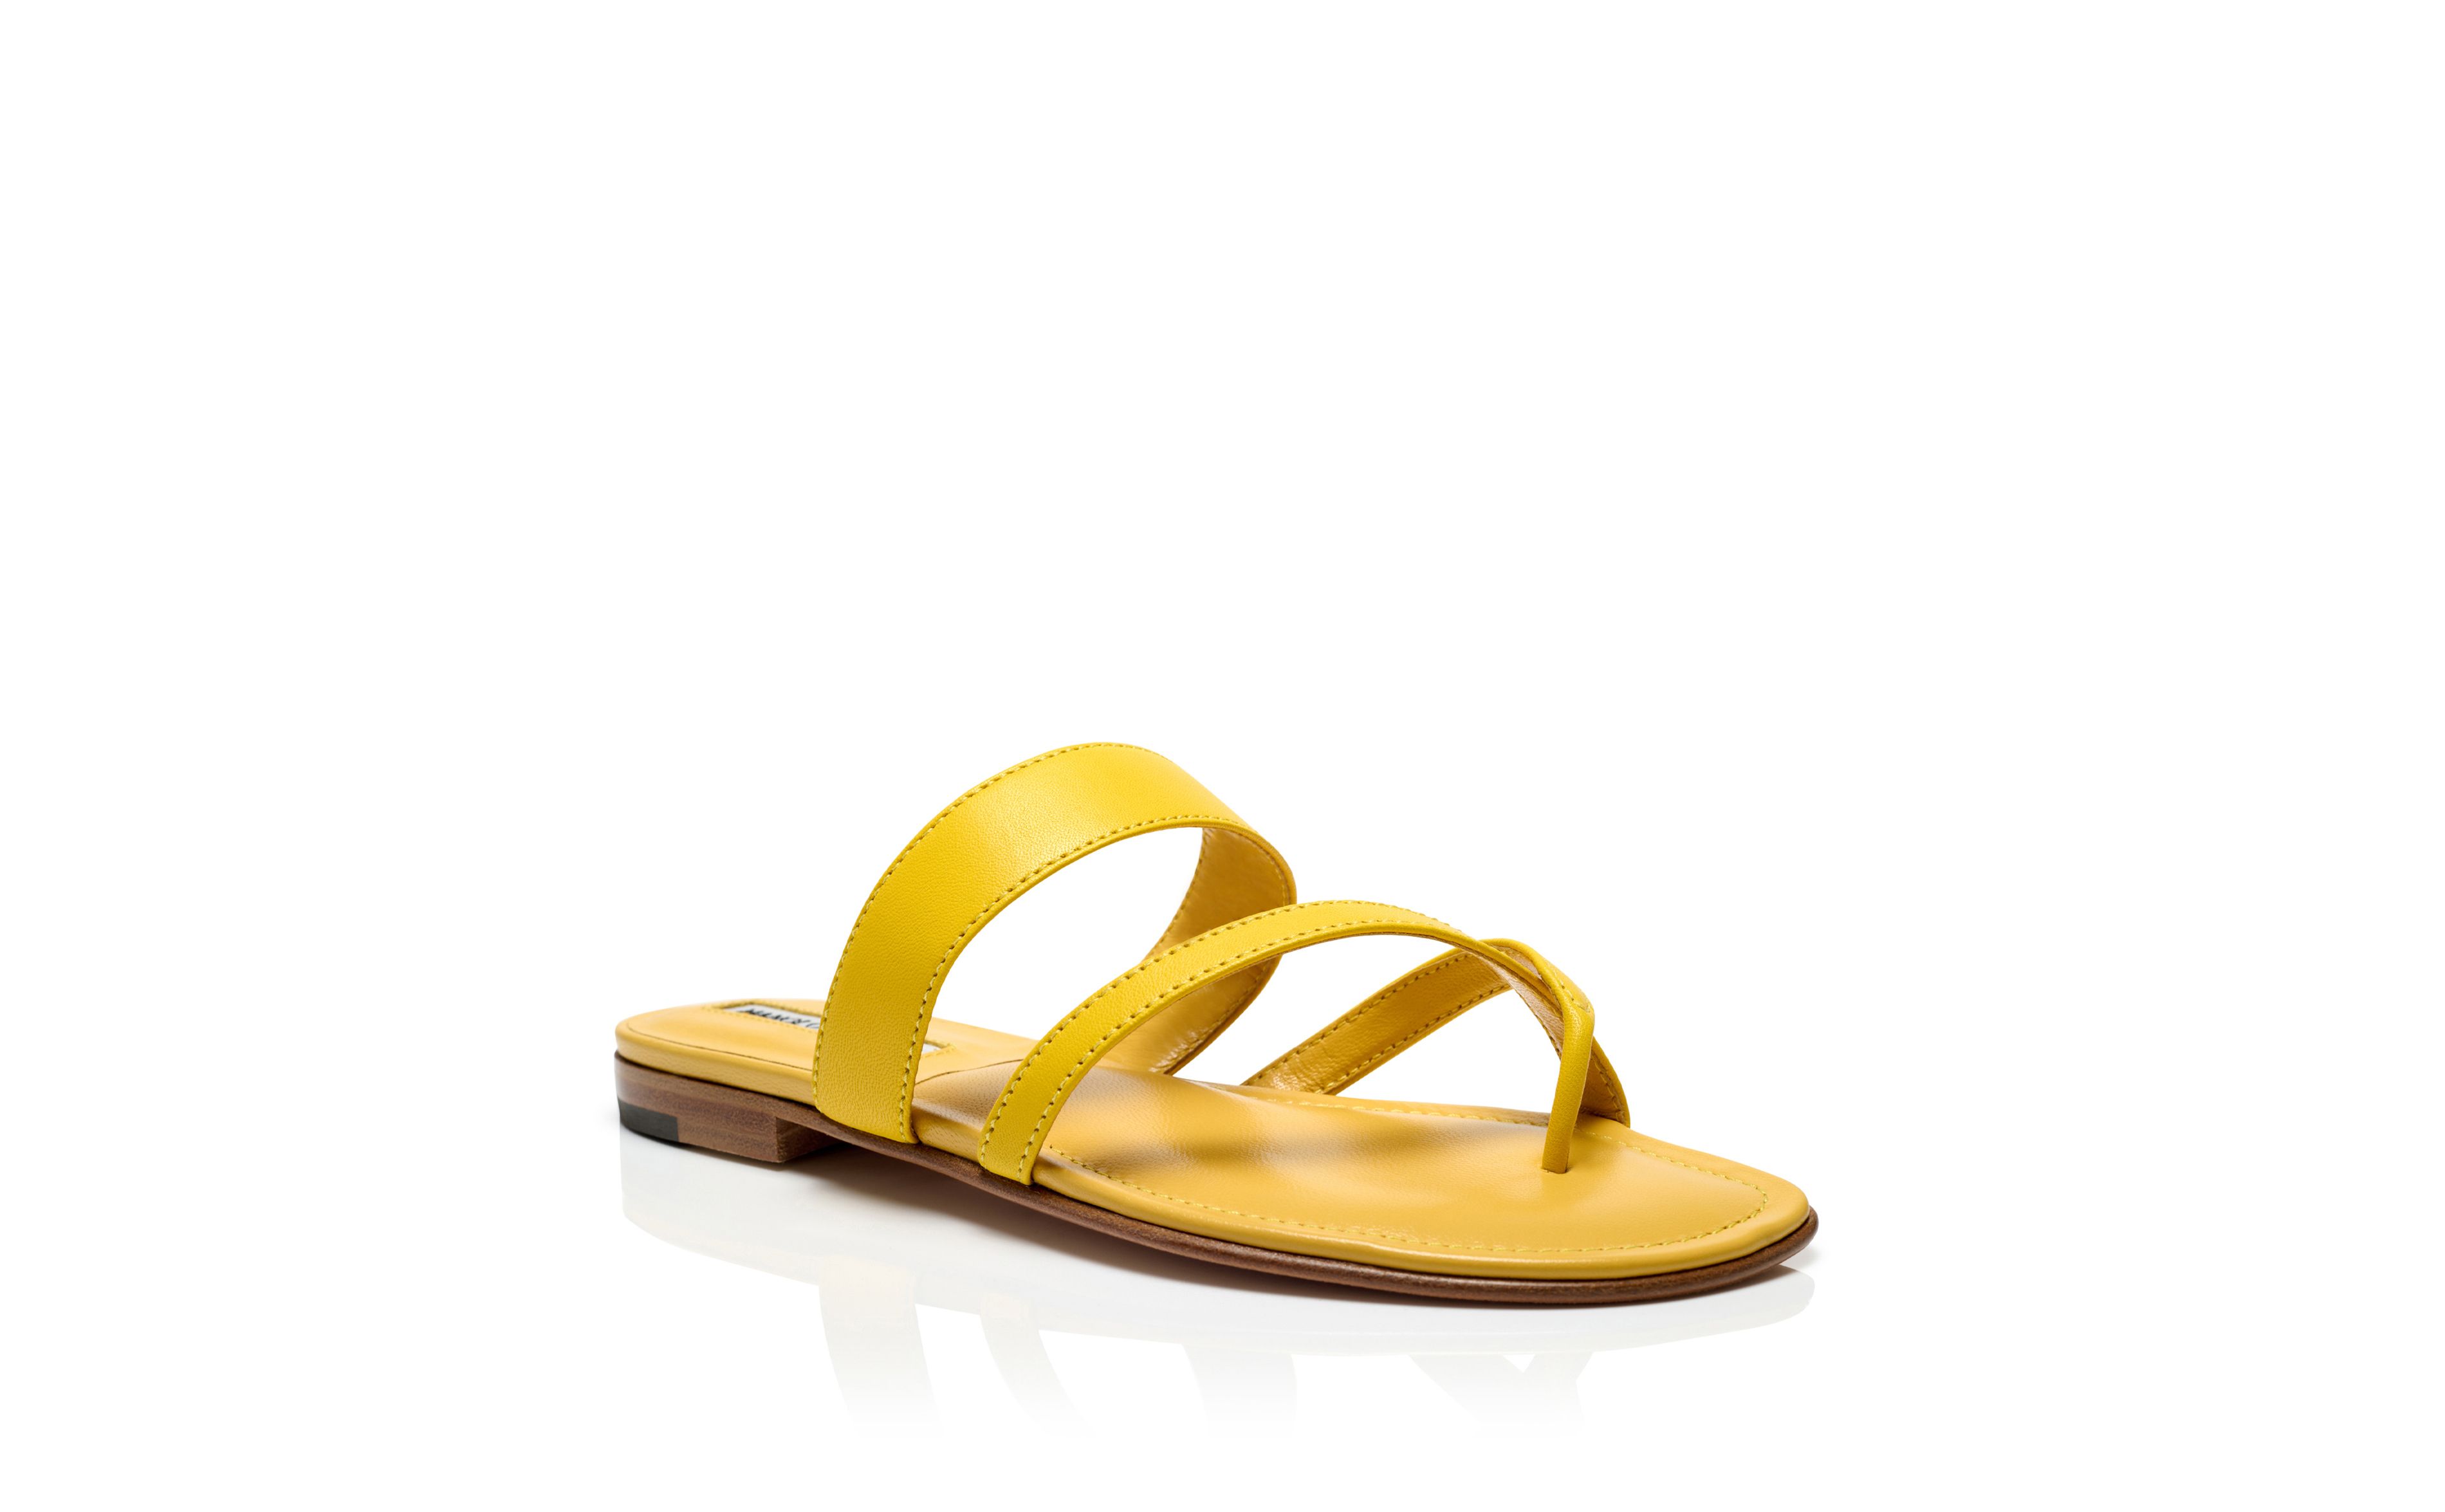 Designer Yellow Nappa Leather Crossover Flat Sandals - Image Upsell